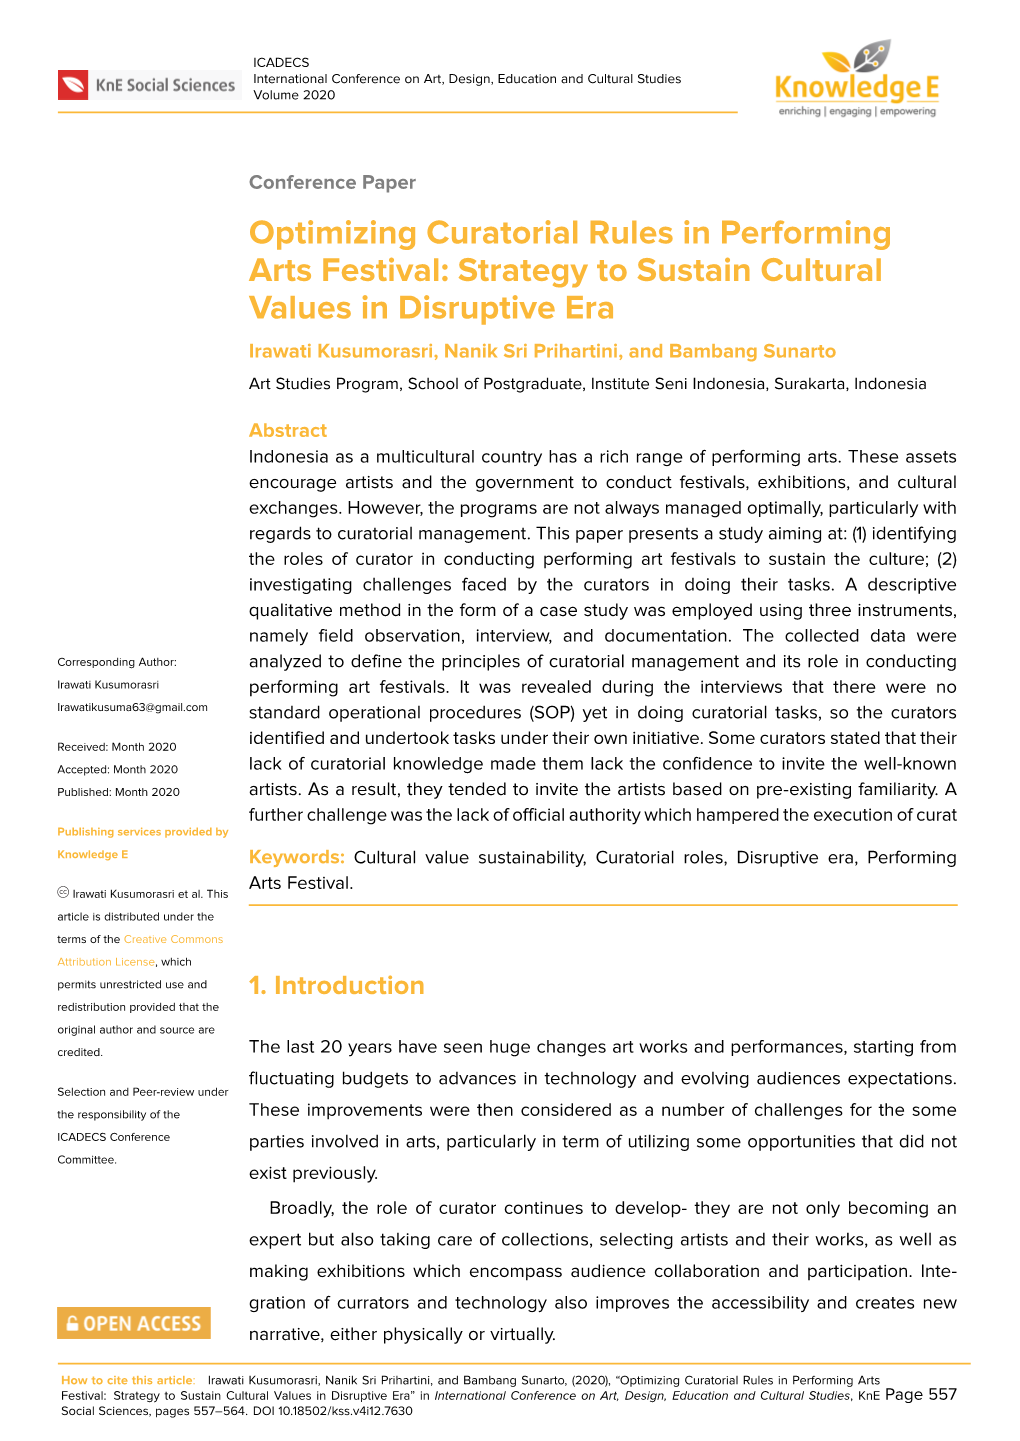 Optimizing Curatorial Rules in Performing Arts Festival: Strategy To